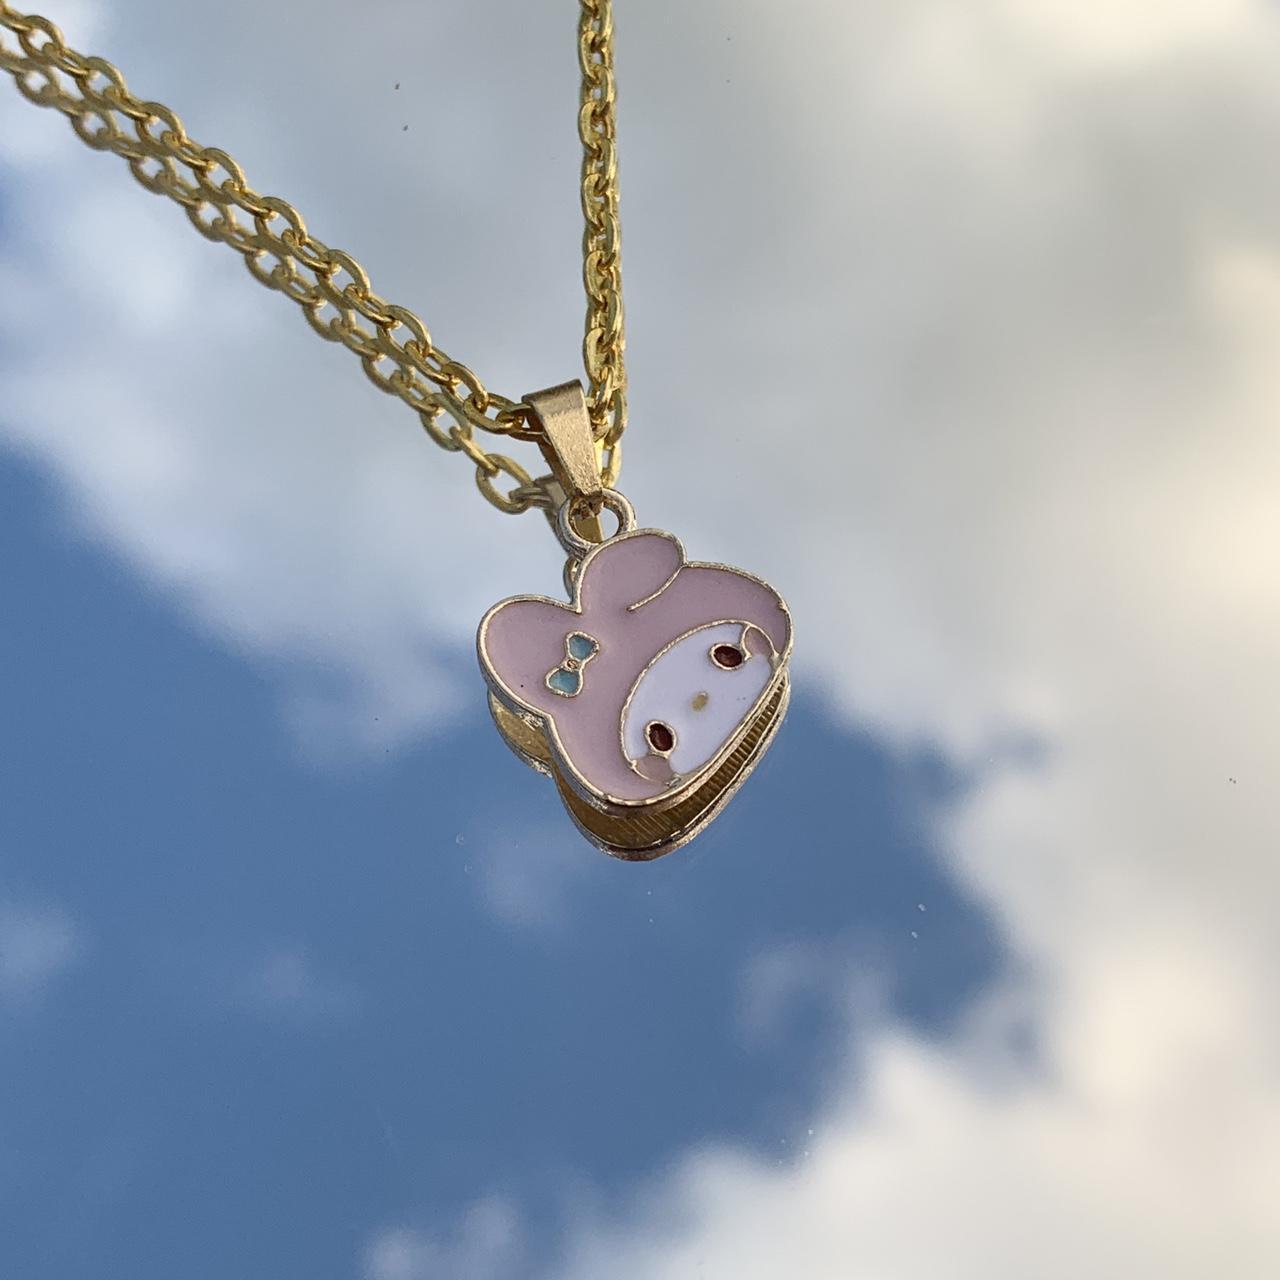 Product Image 1 - my melody necklace

• the necklace